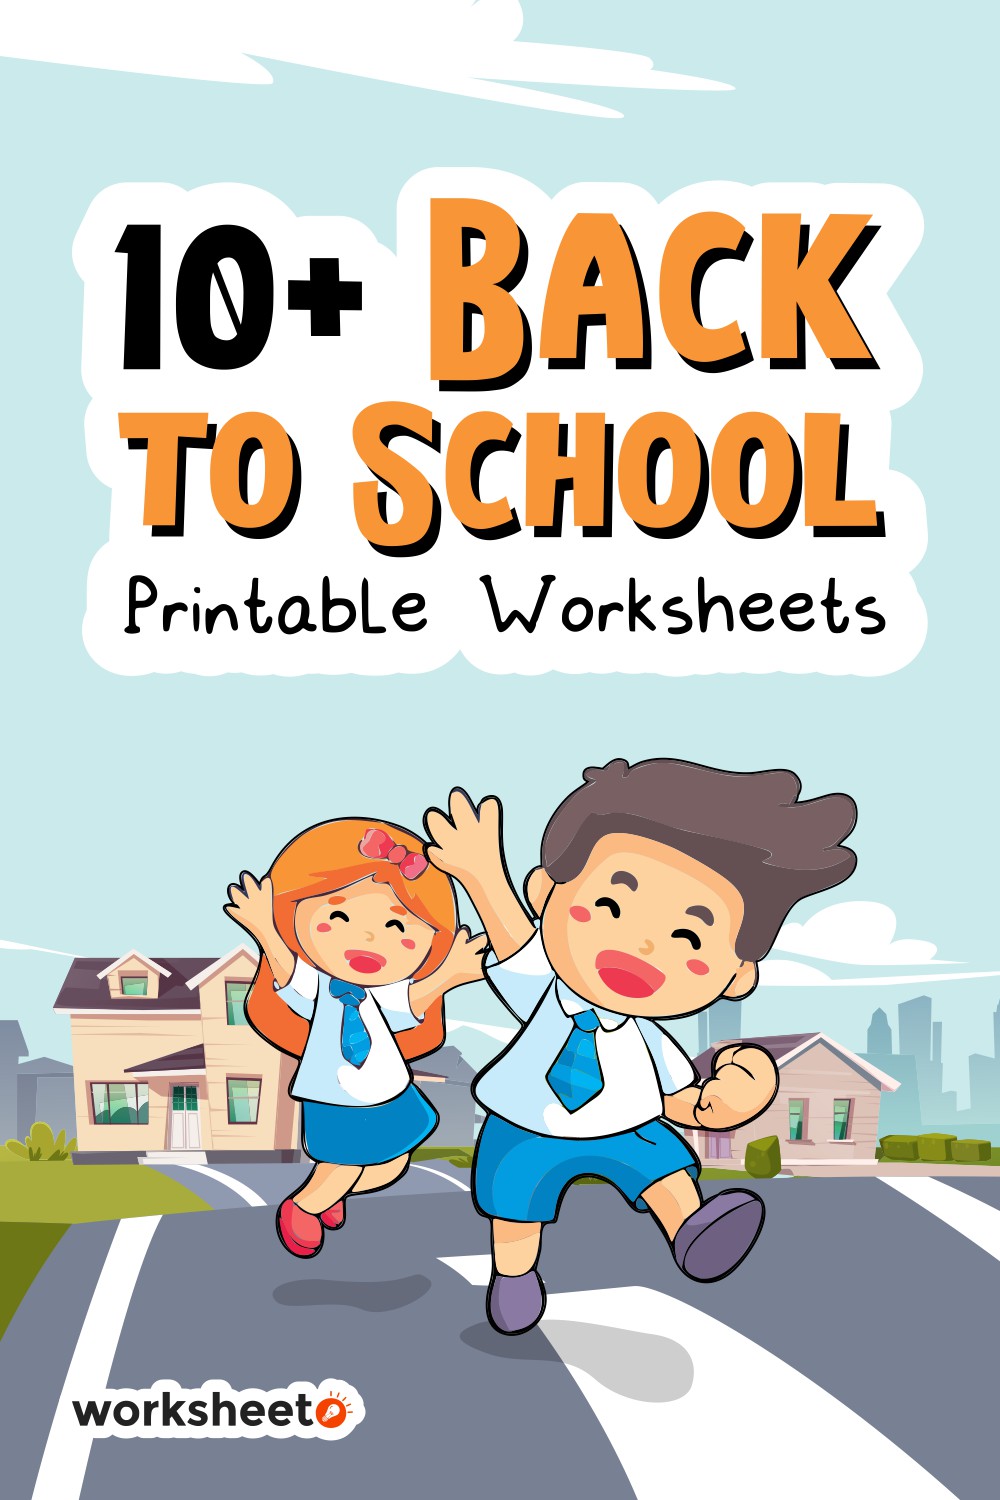 15 Images of Back To School Printable Worksheets